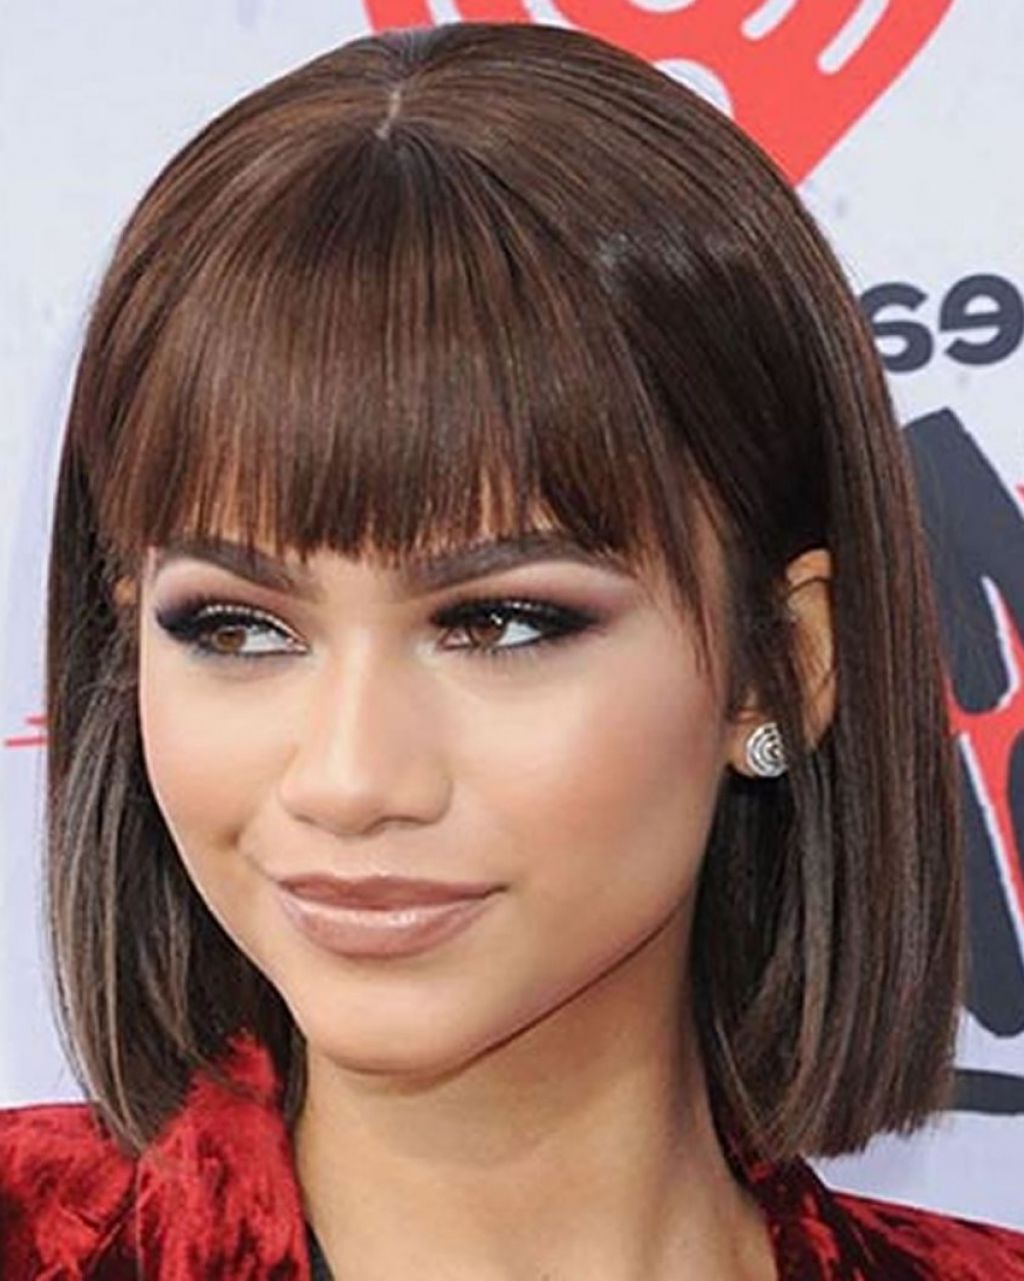 Women Hairstyle : Wavy Bob With Bangs Black Hairstyles Fringe Long With Most Current Black Medium Hairstyles With Bangs And Layers (View 7 of 20)